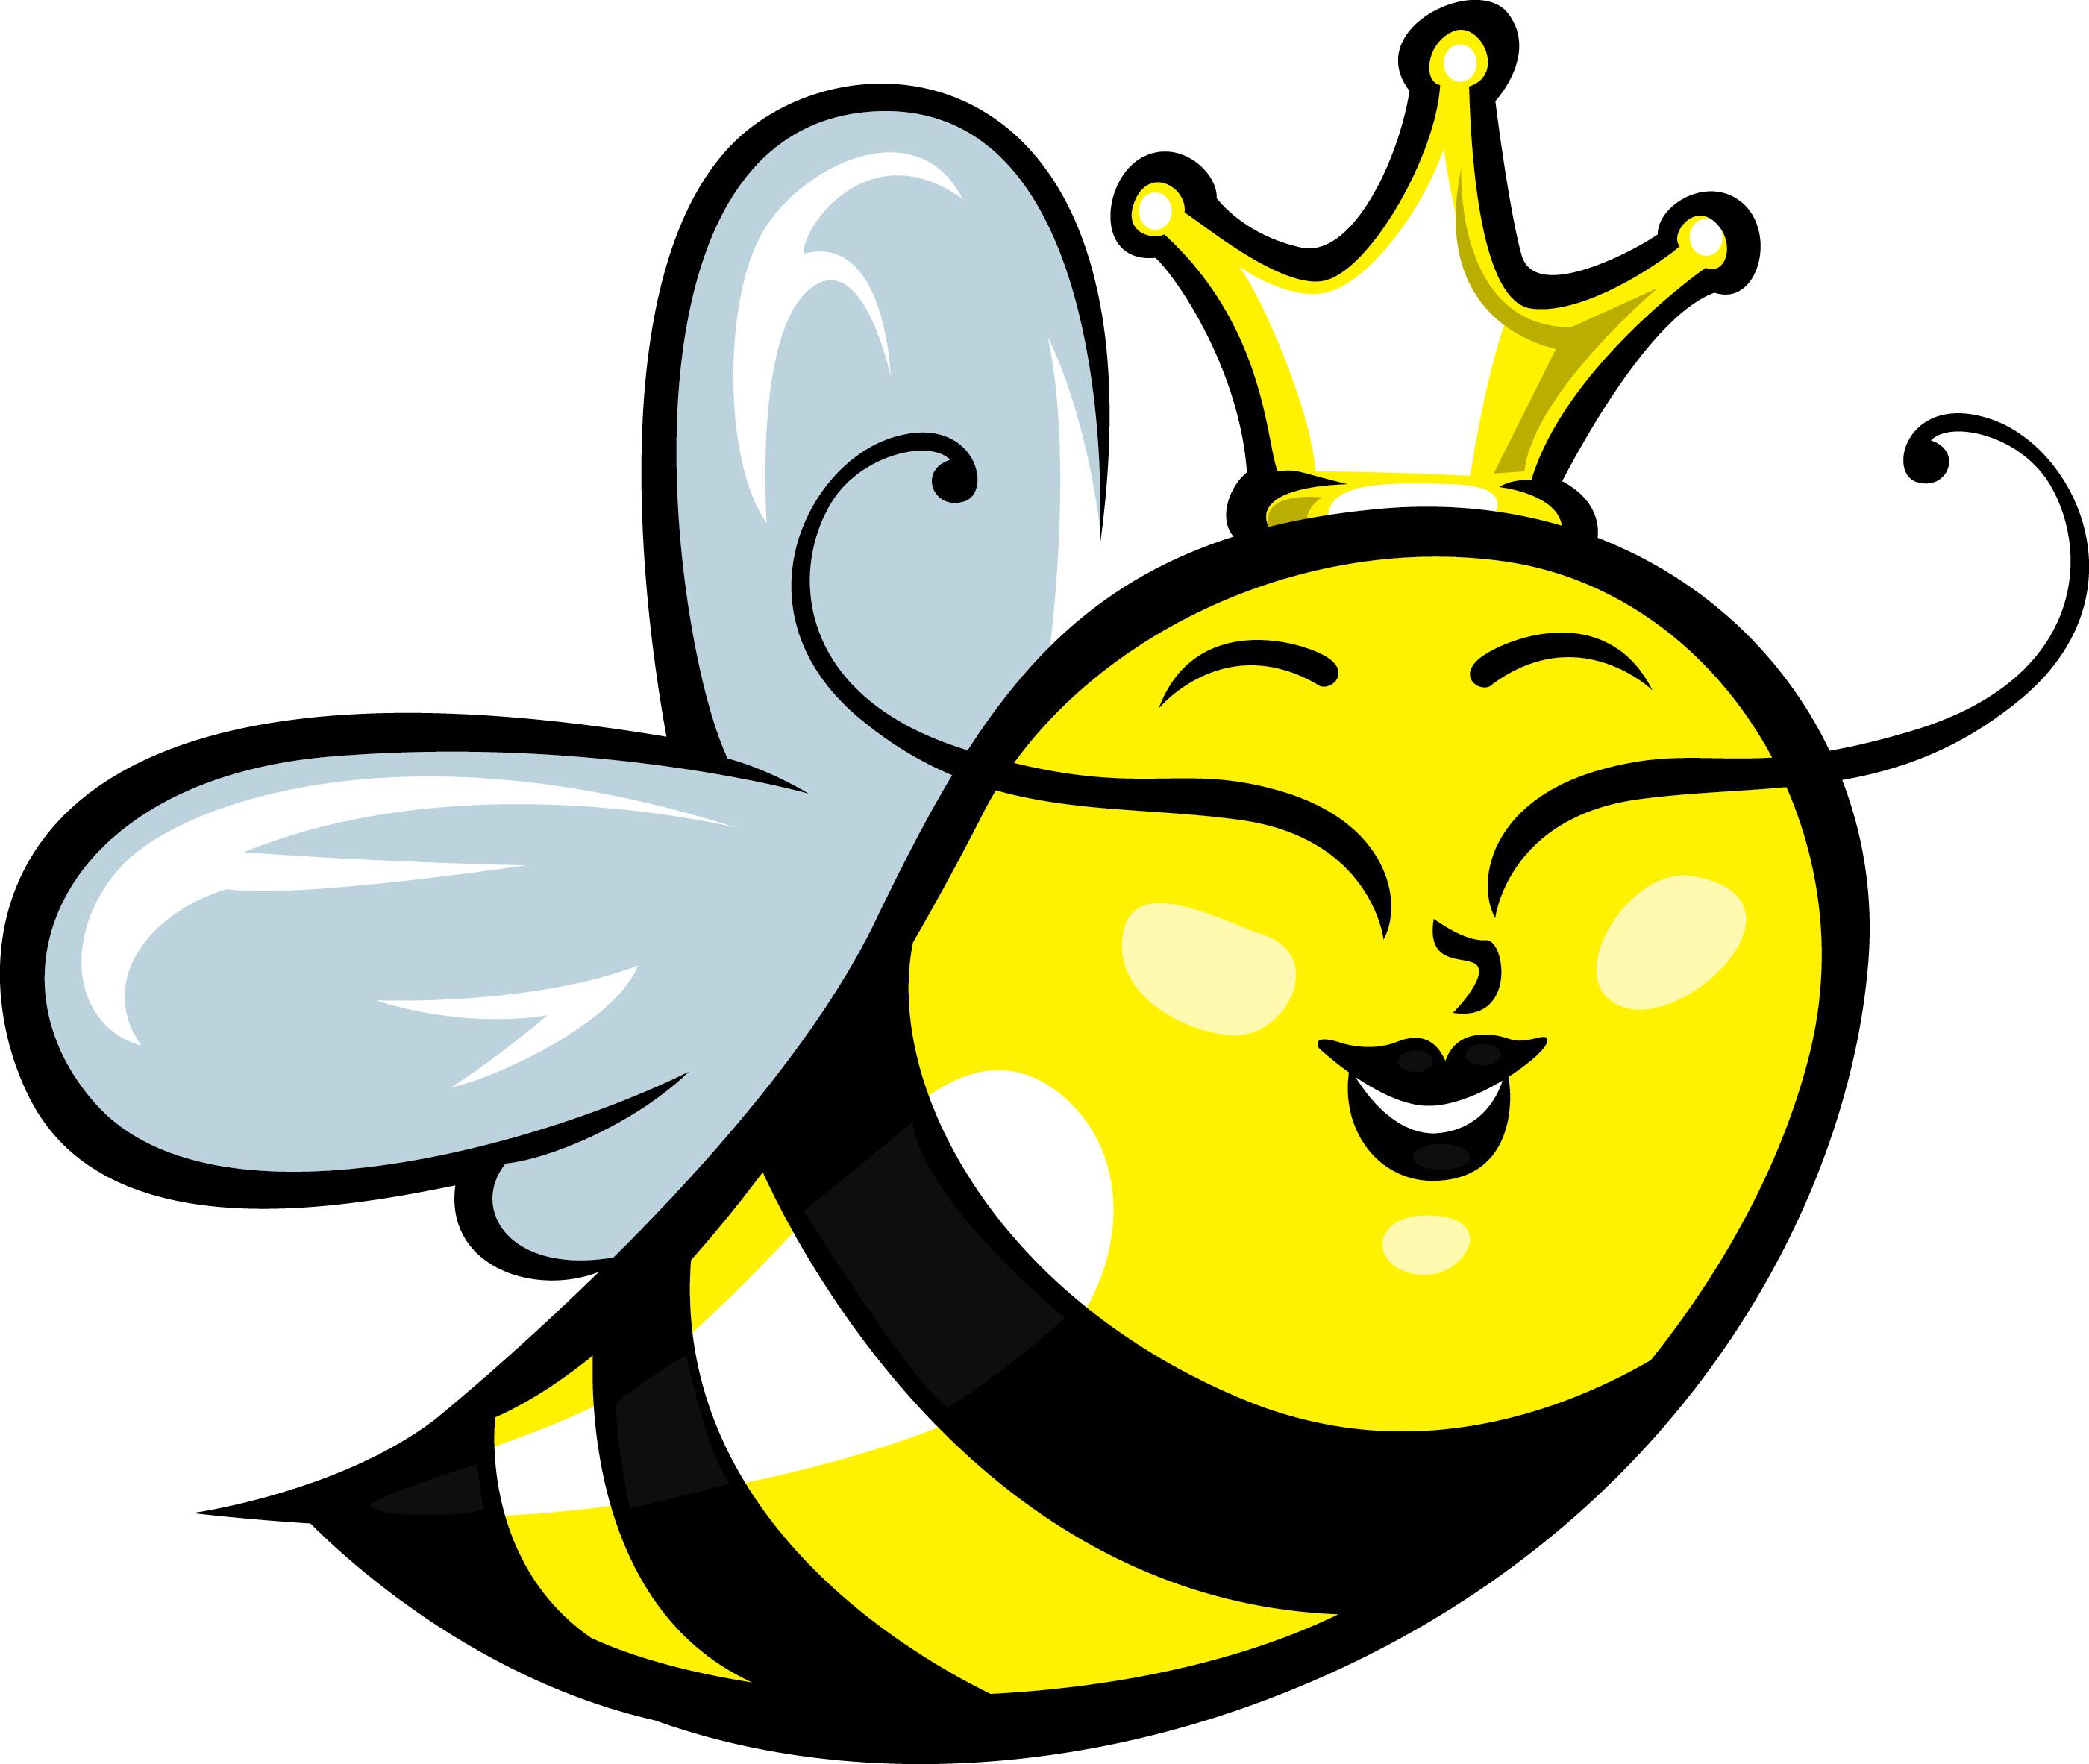 How to draw a bumble bee clipart - dbclipart.com